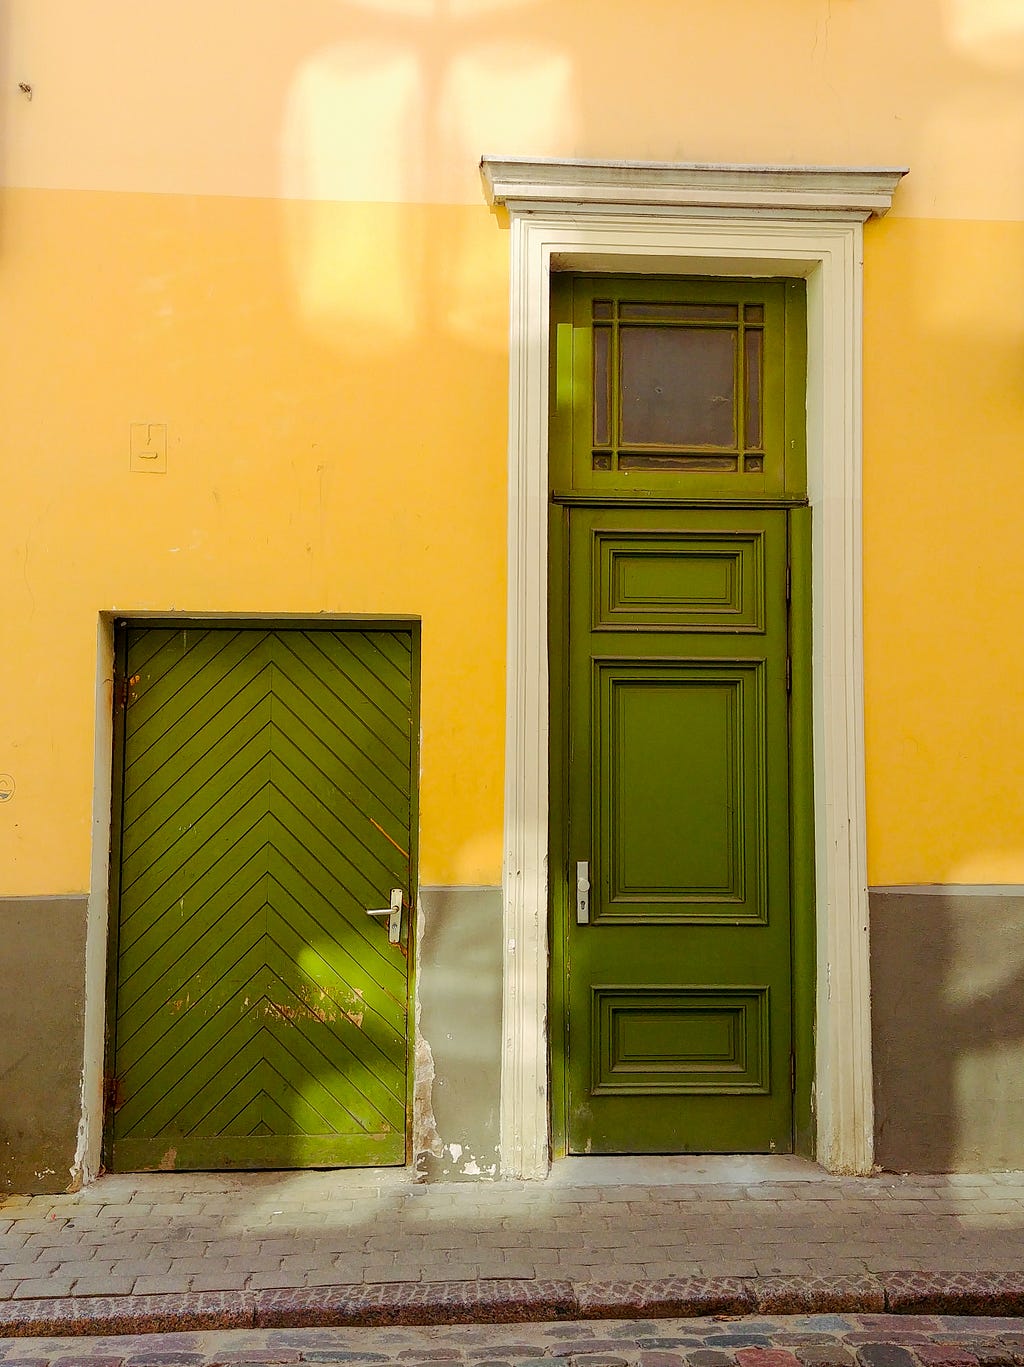 Colorful comparison of two green doors — similar in color but different in height, texture, and style.